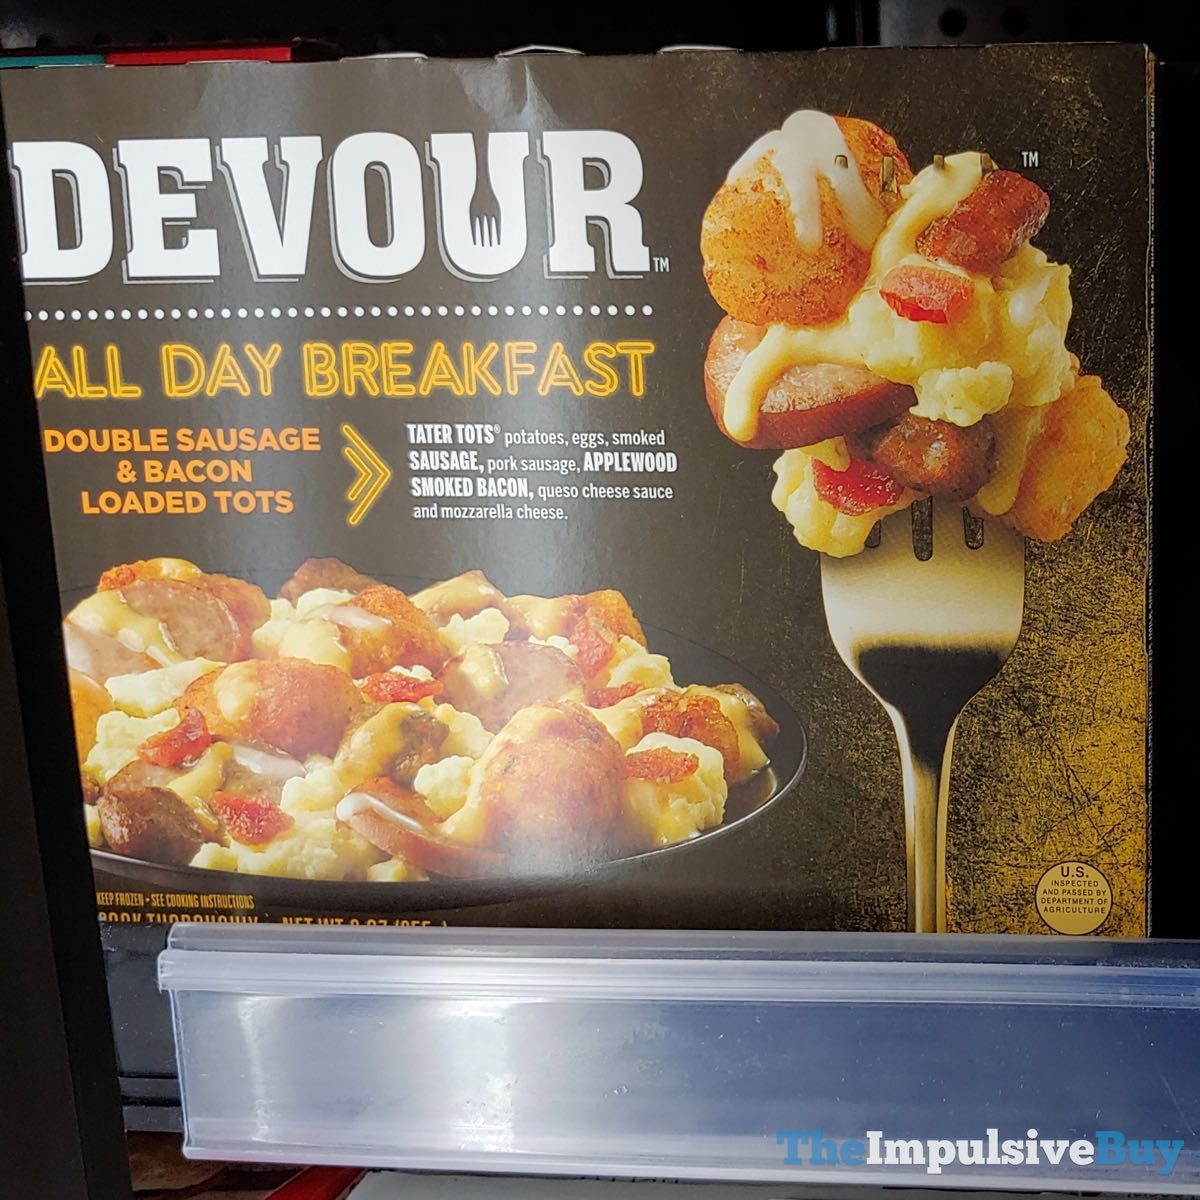 Devour Microwave Dinners
 SPOTTED Devour All Day Breakfast Frozen Entrees The